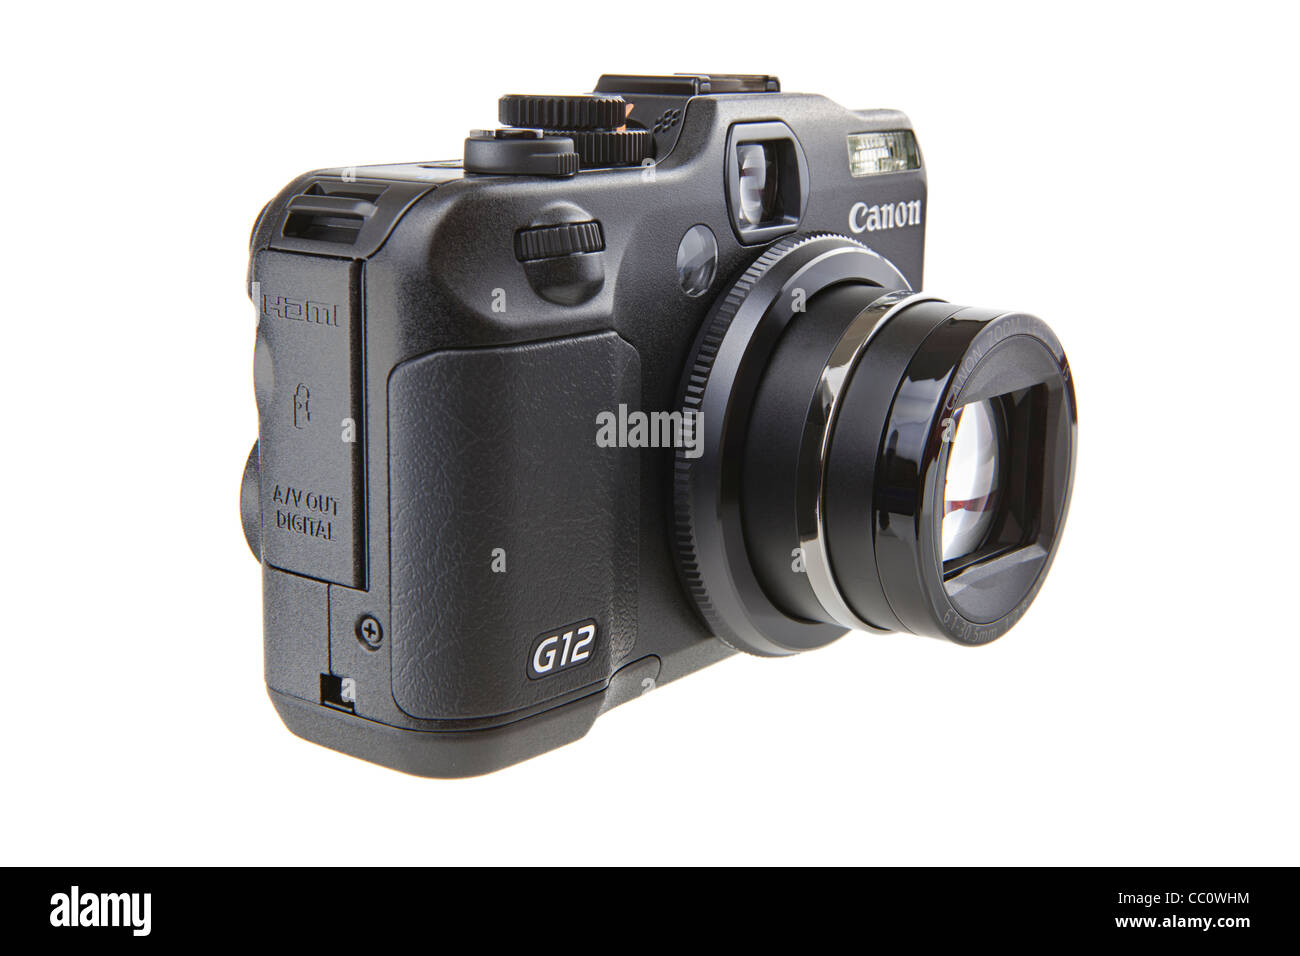 Canon G12 Camera - Product retail shots against pure white background  photographed under studio lighting Stock Photo - Alamy